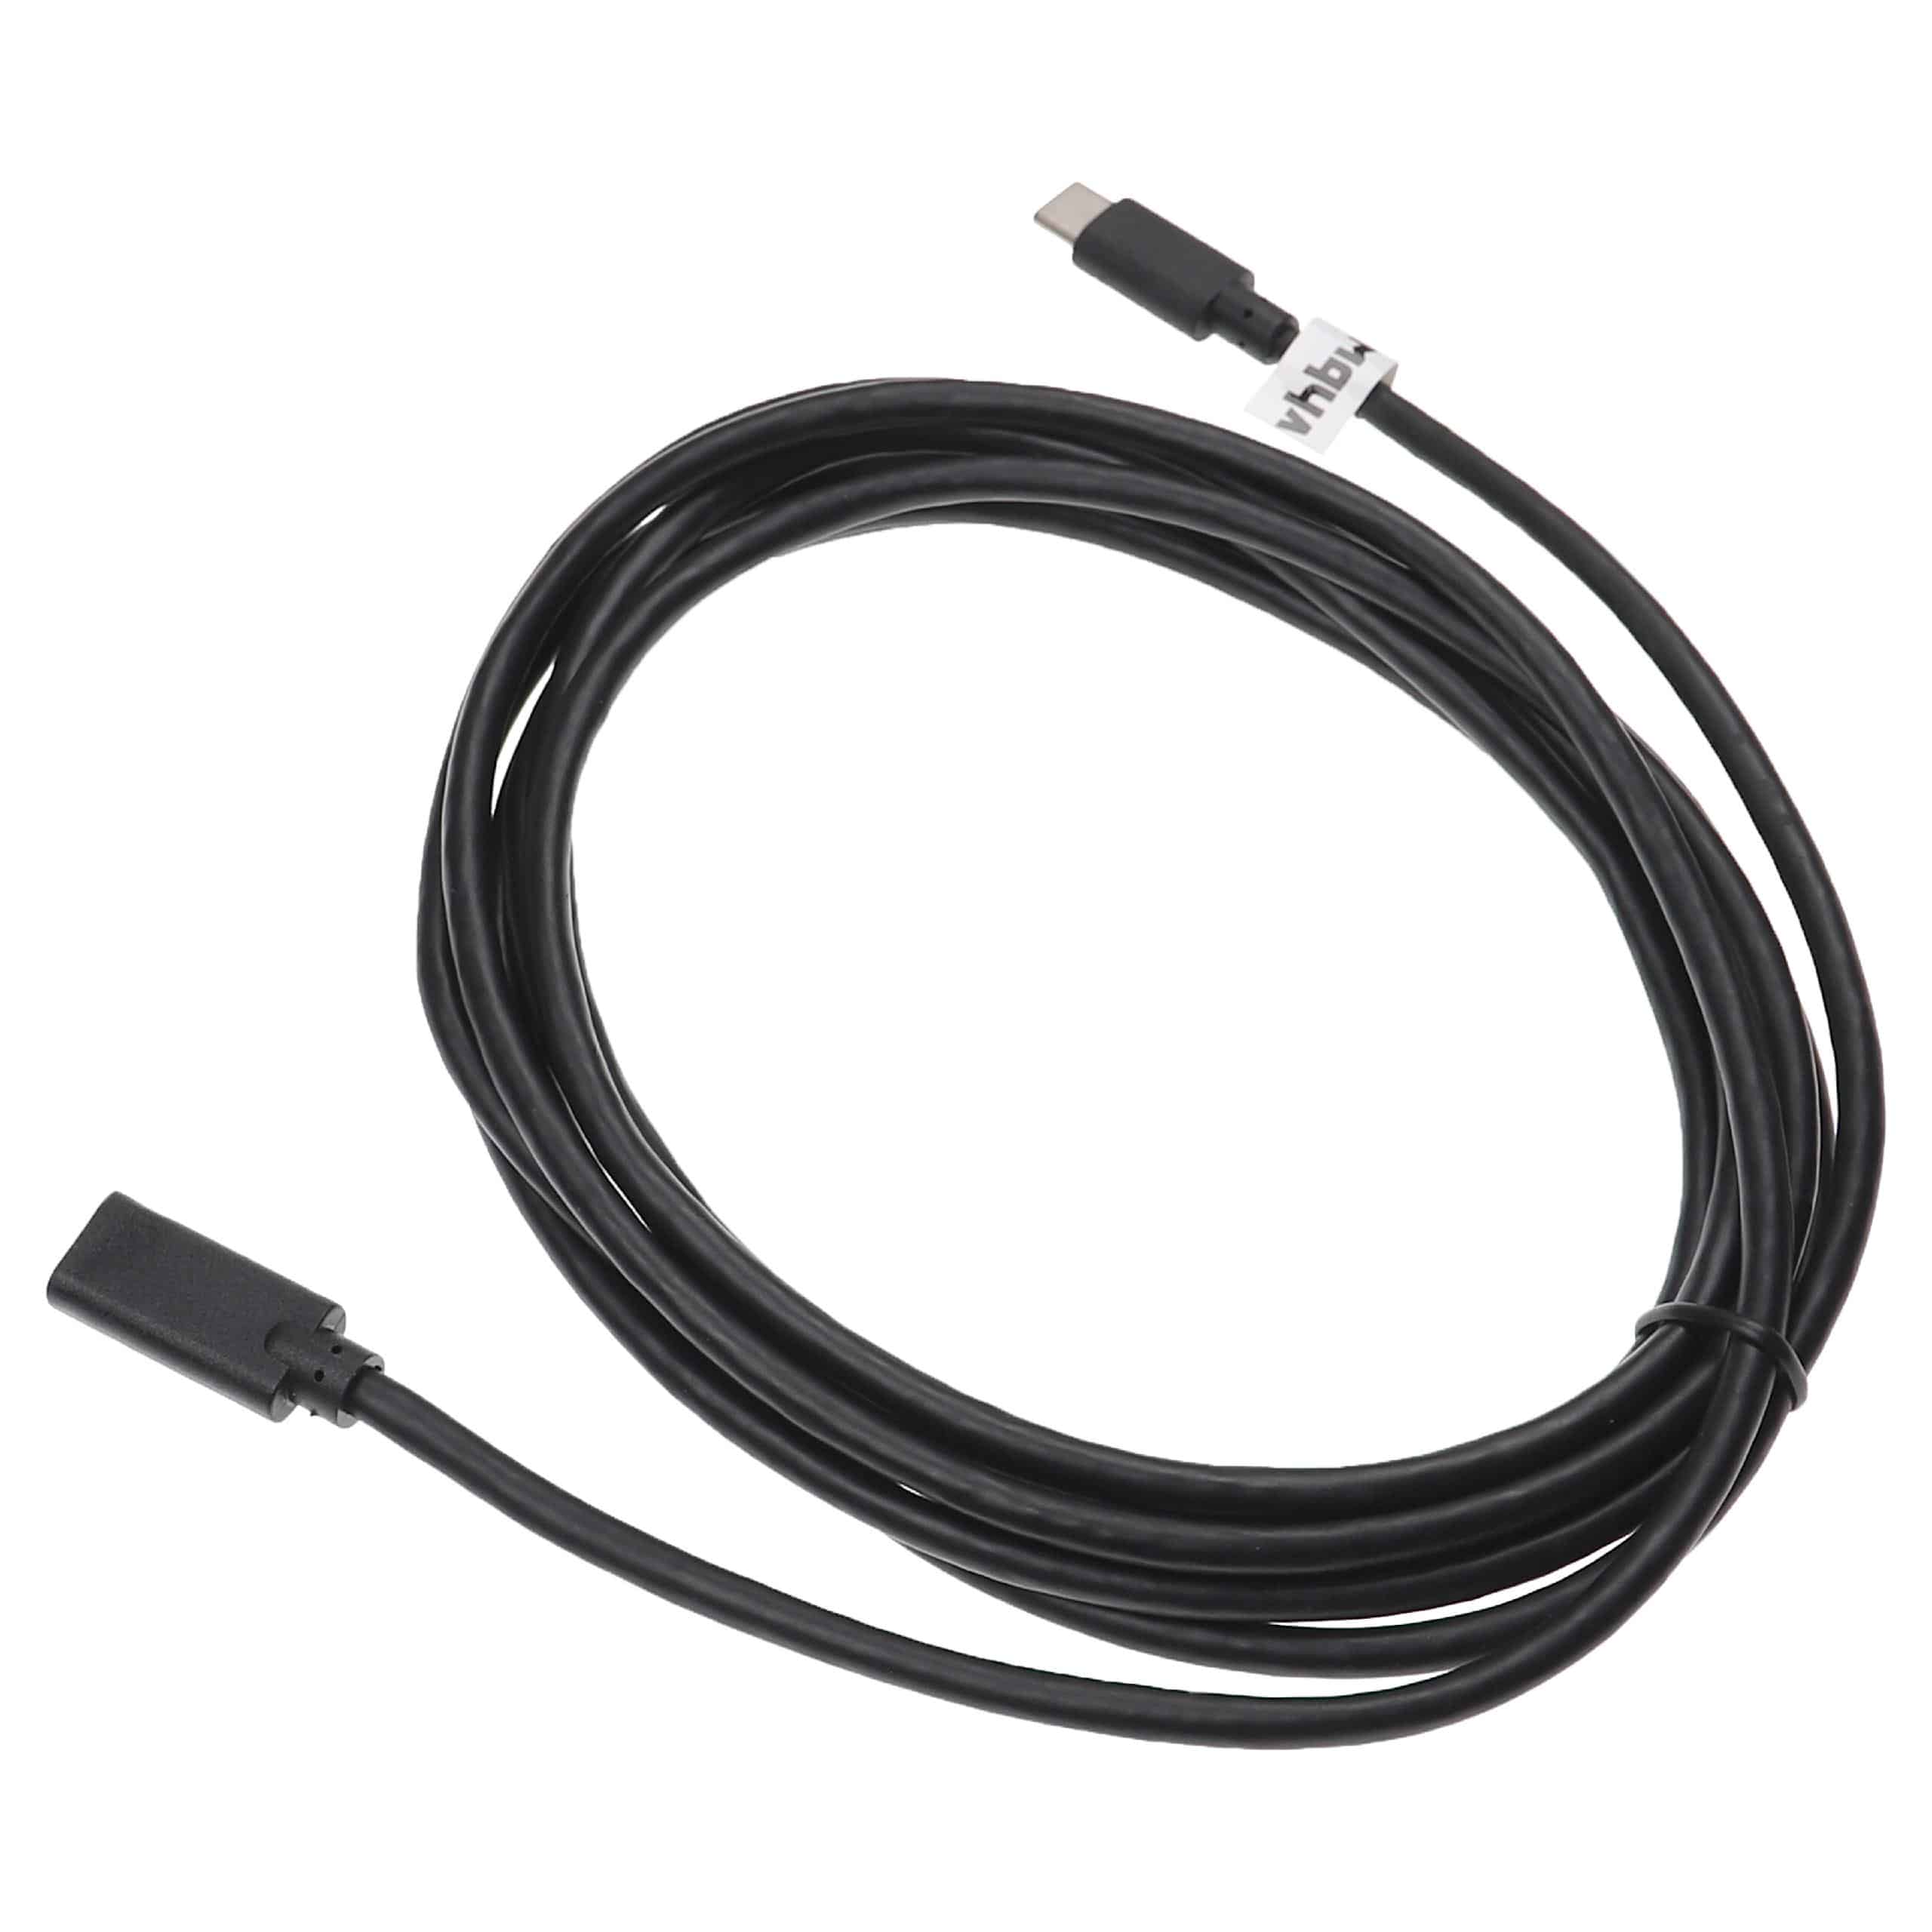 USB C Extension Cable for various Tablets, Notebooks, Smartphones, PCs - 3 m Black, USB 3.1 C Cable